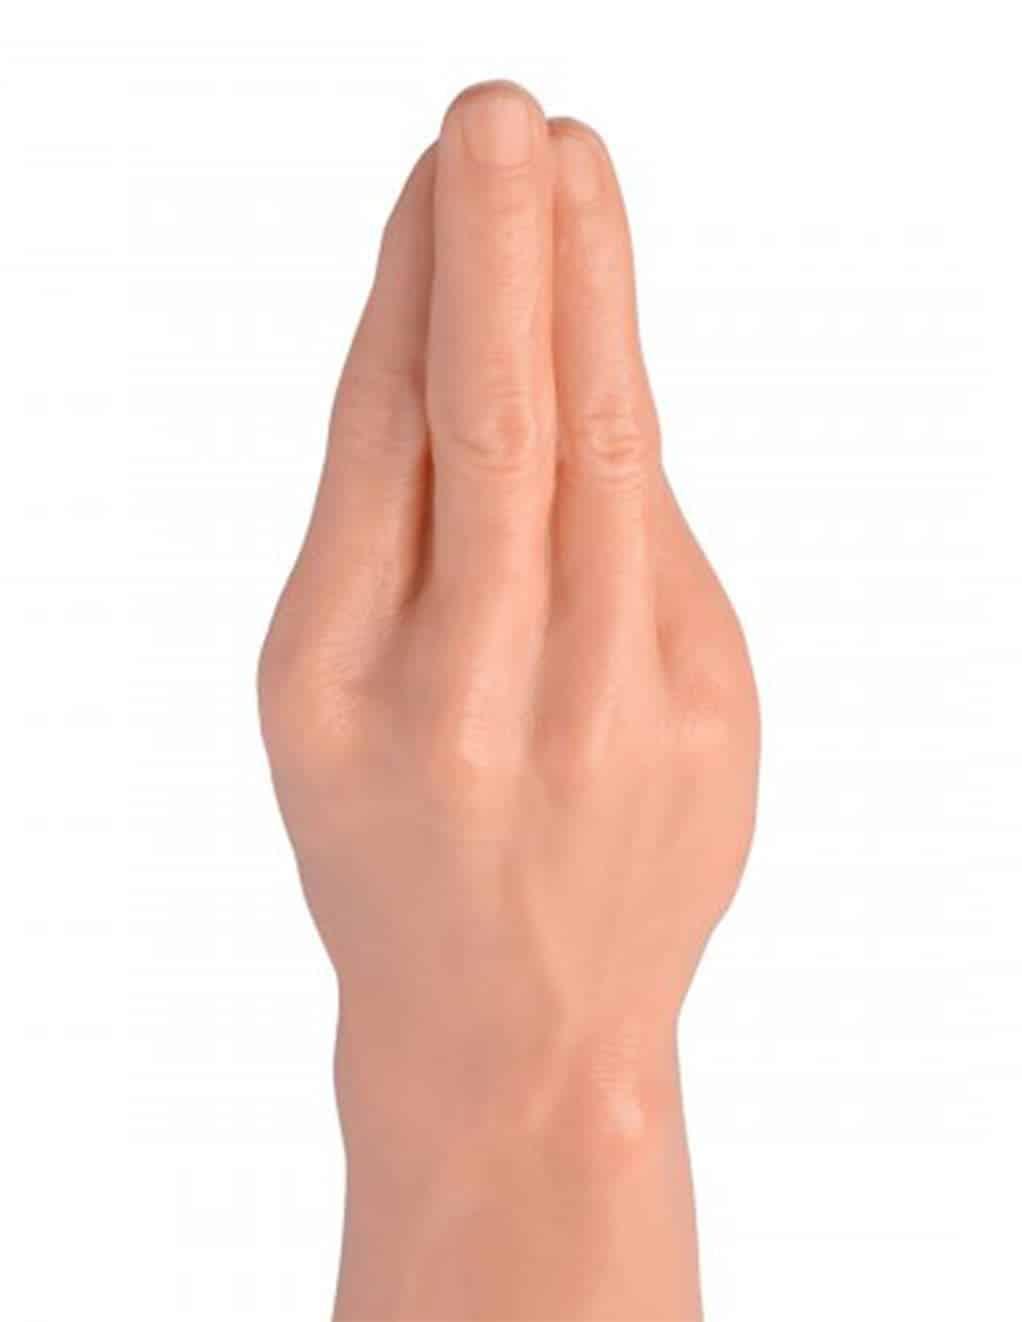 The Fister Hand and Forearm Dildo. Slide 2